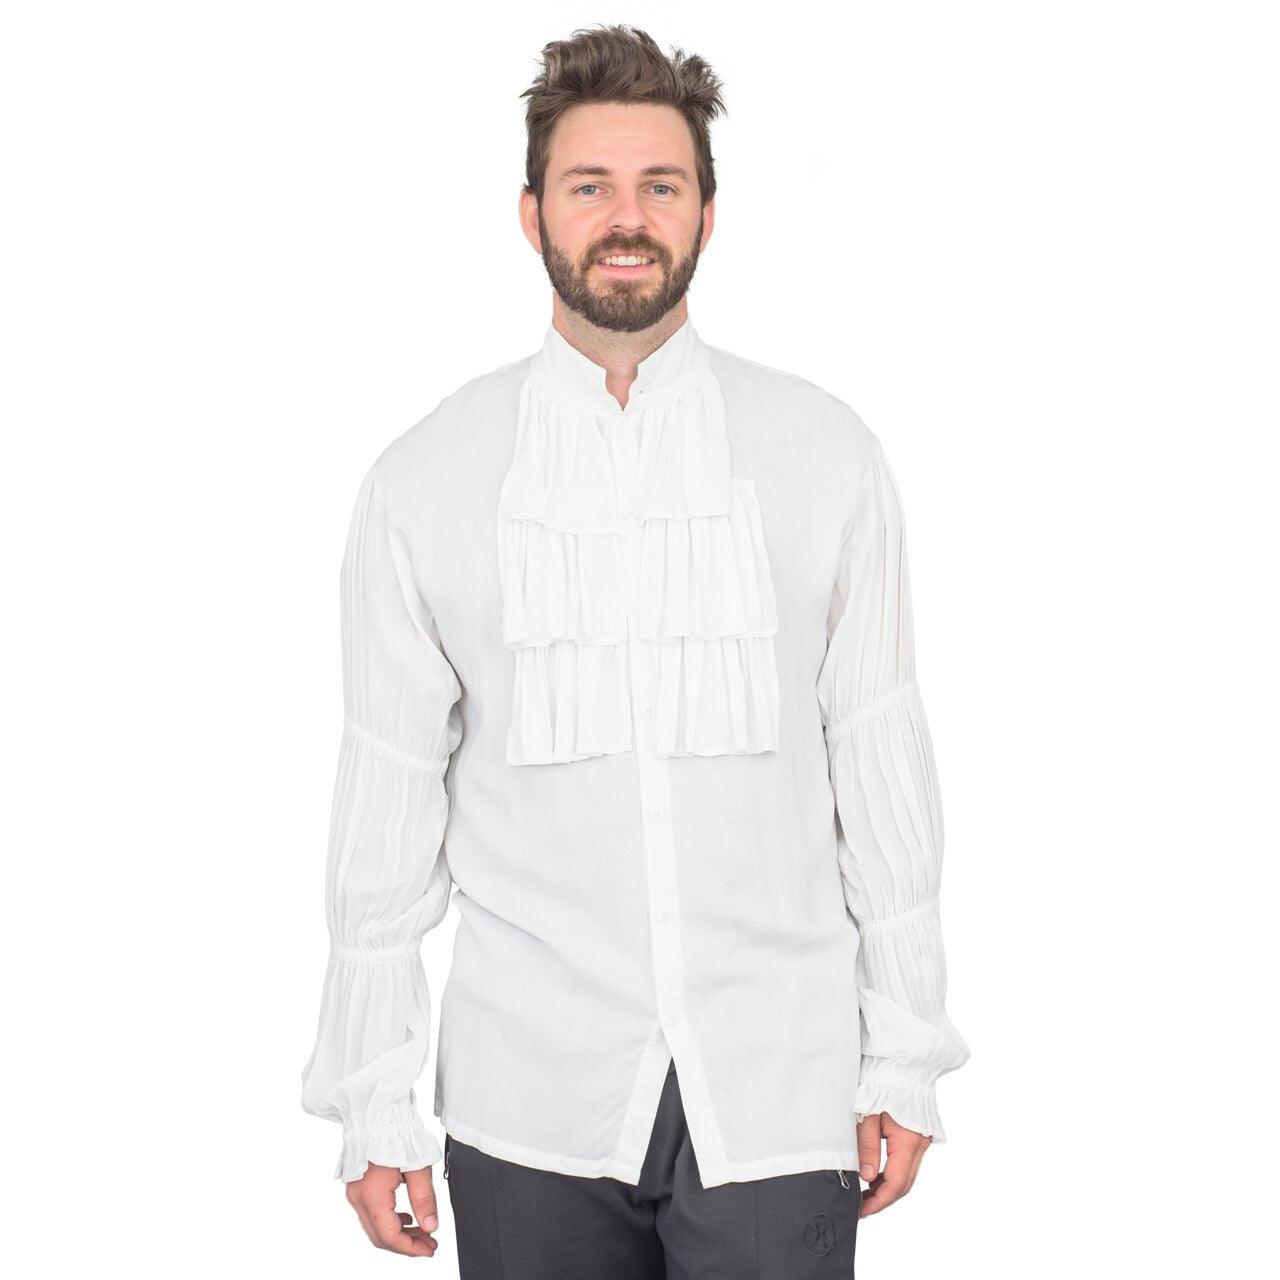 Halloween Costume Jerry Puff White Buttom Up Shirt